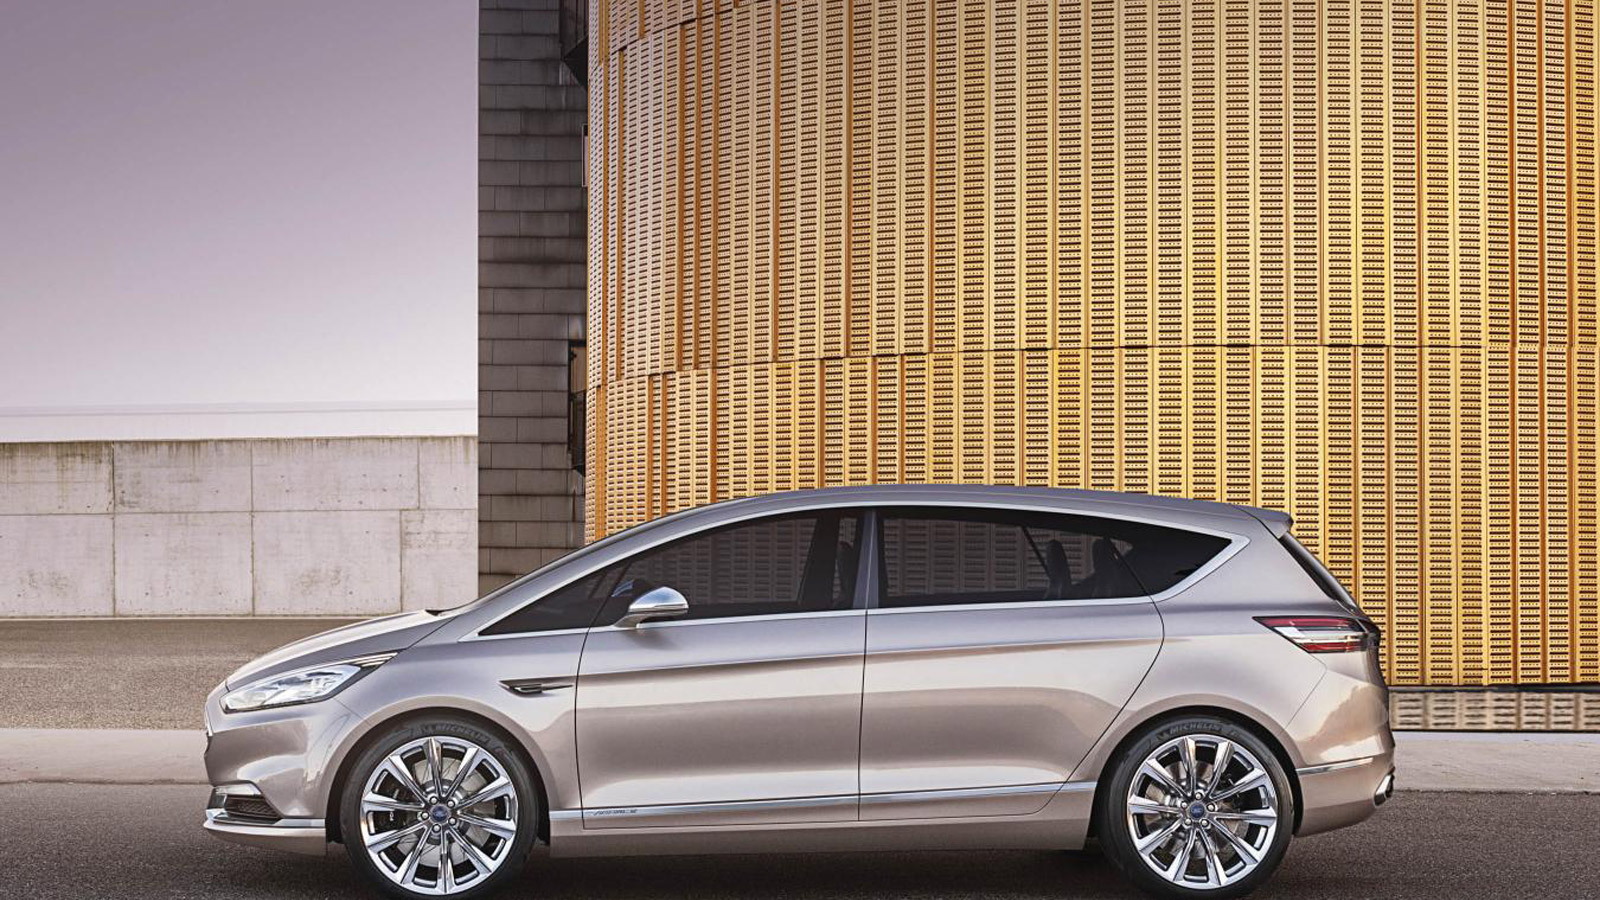 Ford S-Max Vignale concept, 2014 Milan Fashion Week